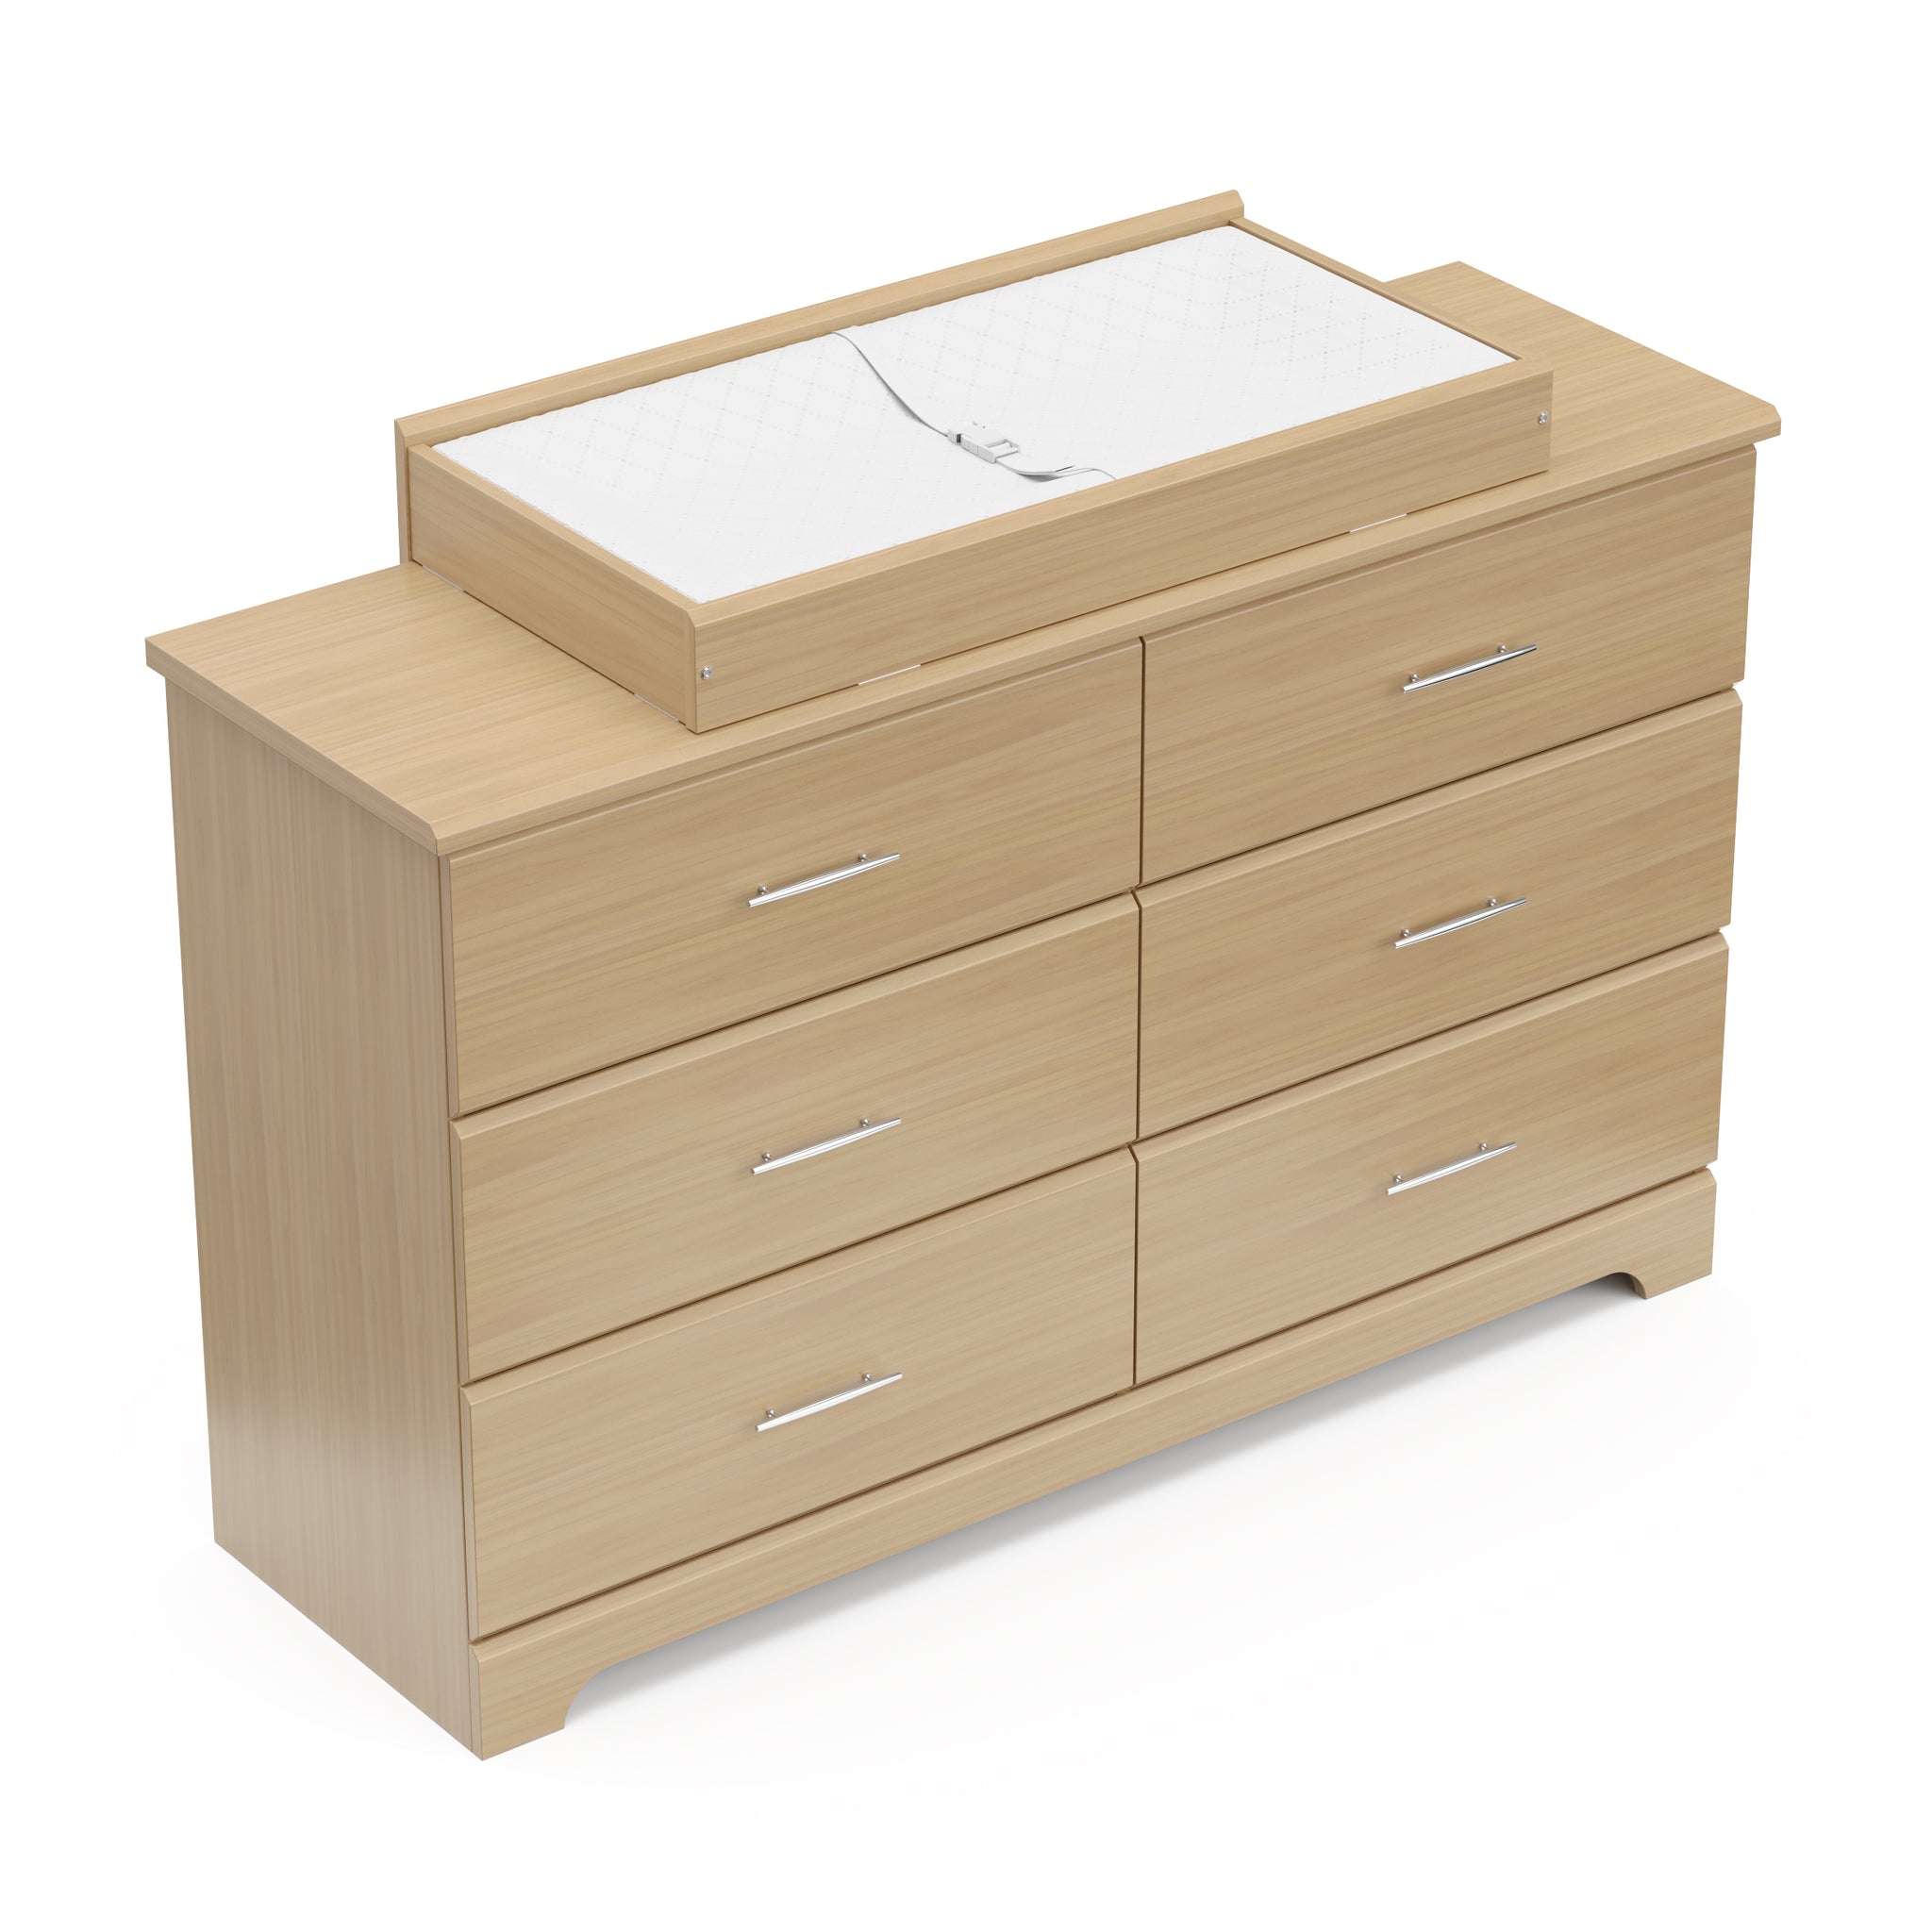 Driftwood 6 drawer dresser with changing topper and changing pad